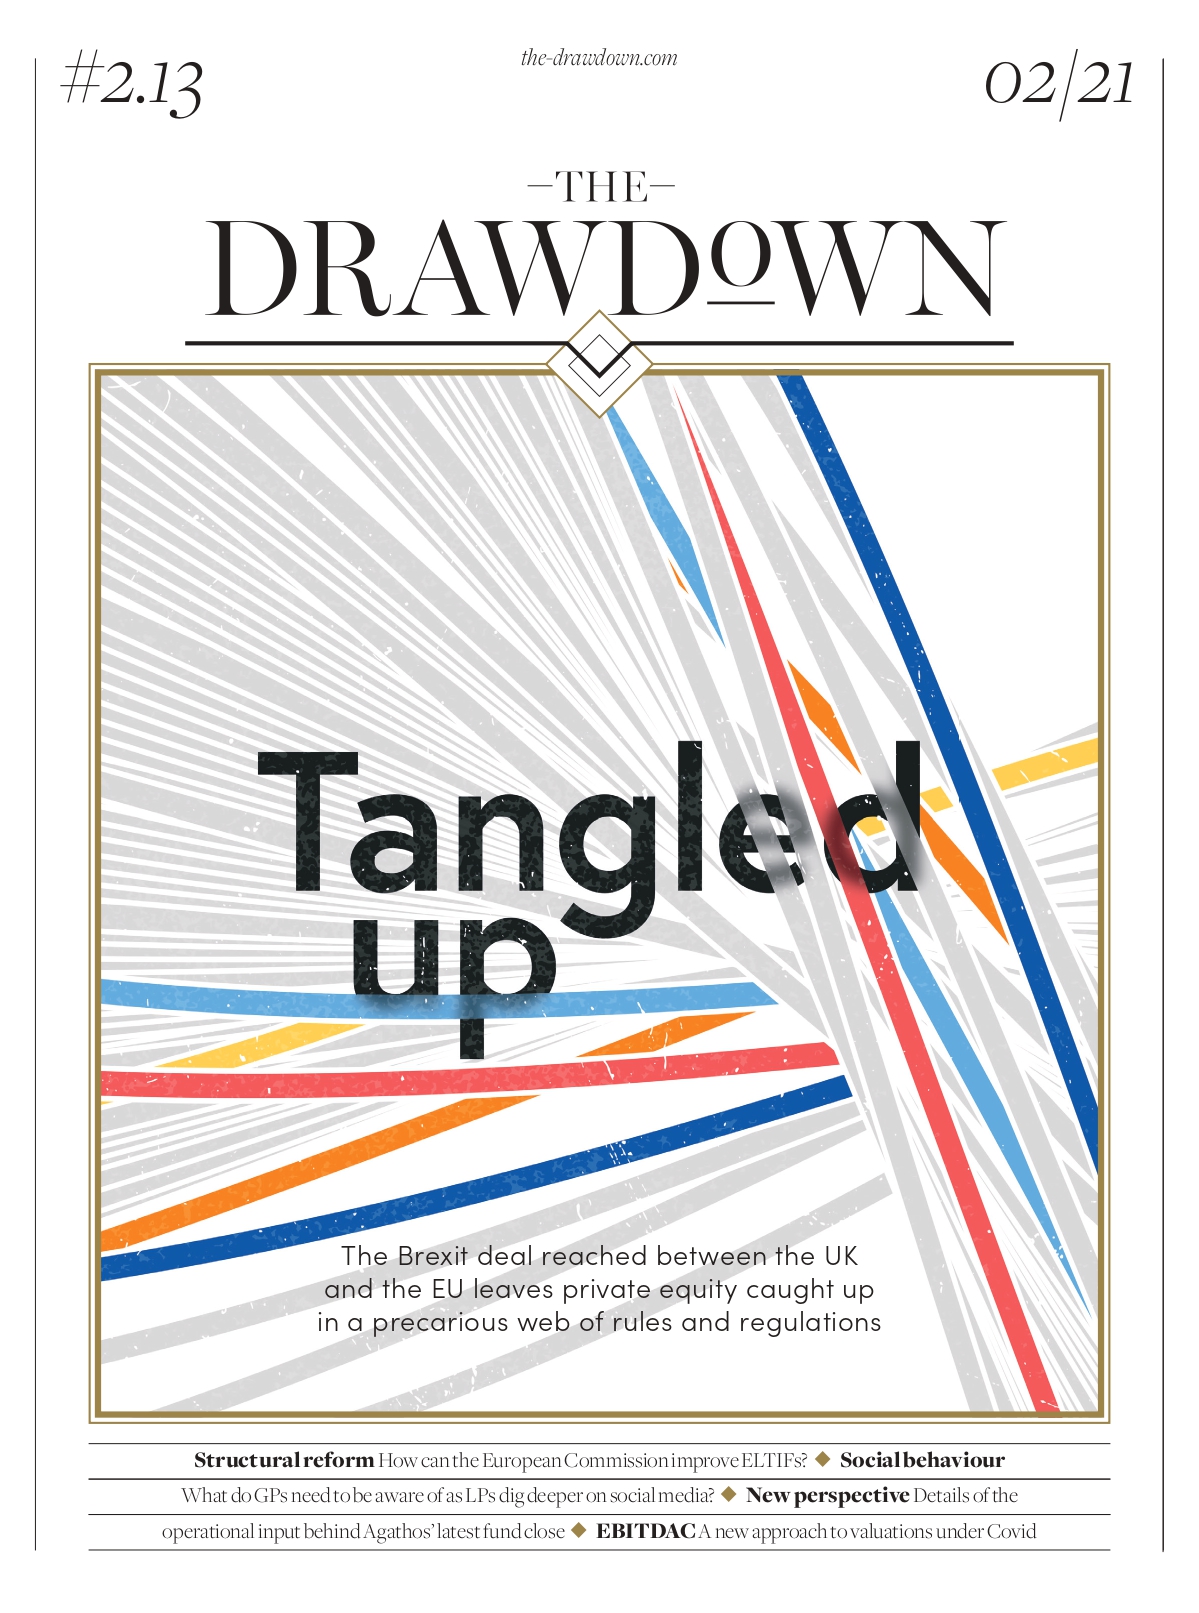 The Drawdown Issue February 2021 Cover